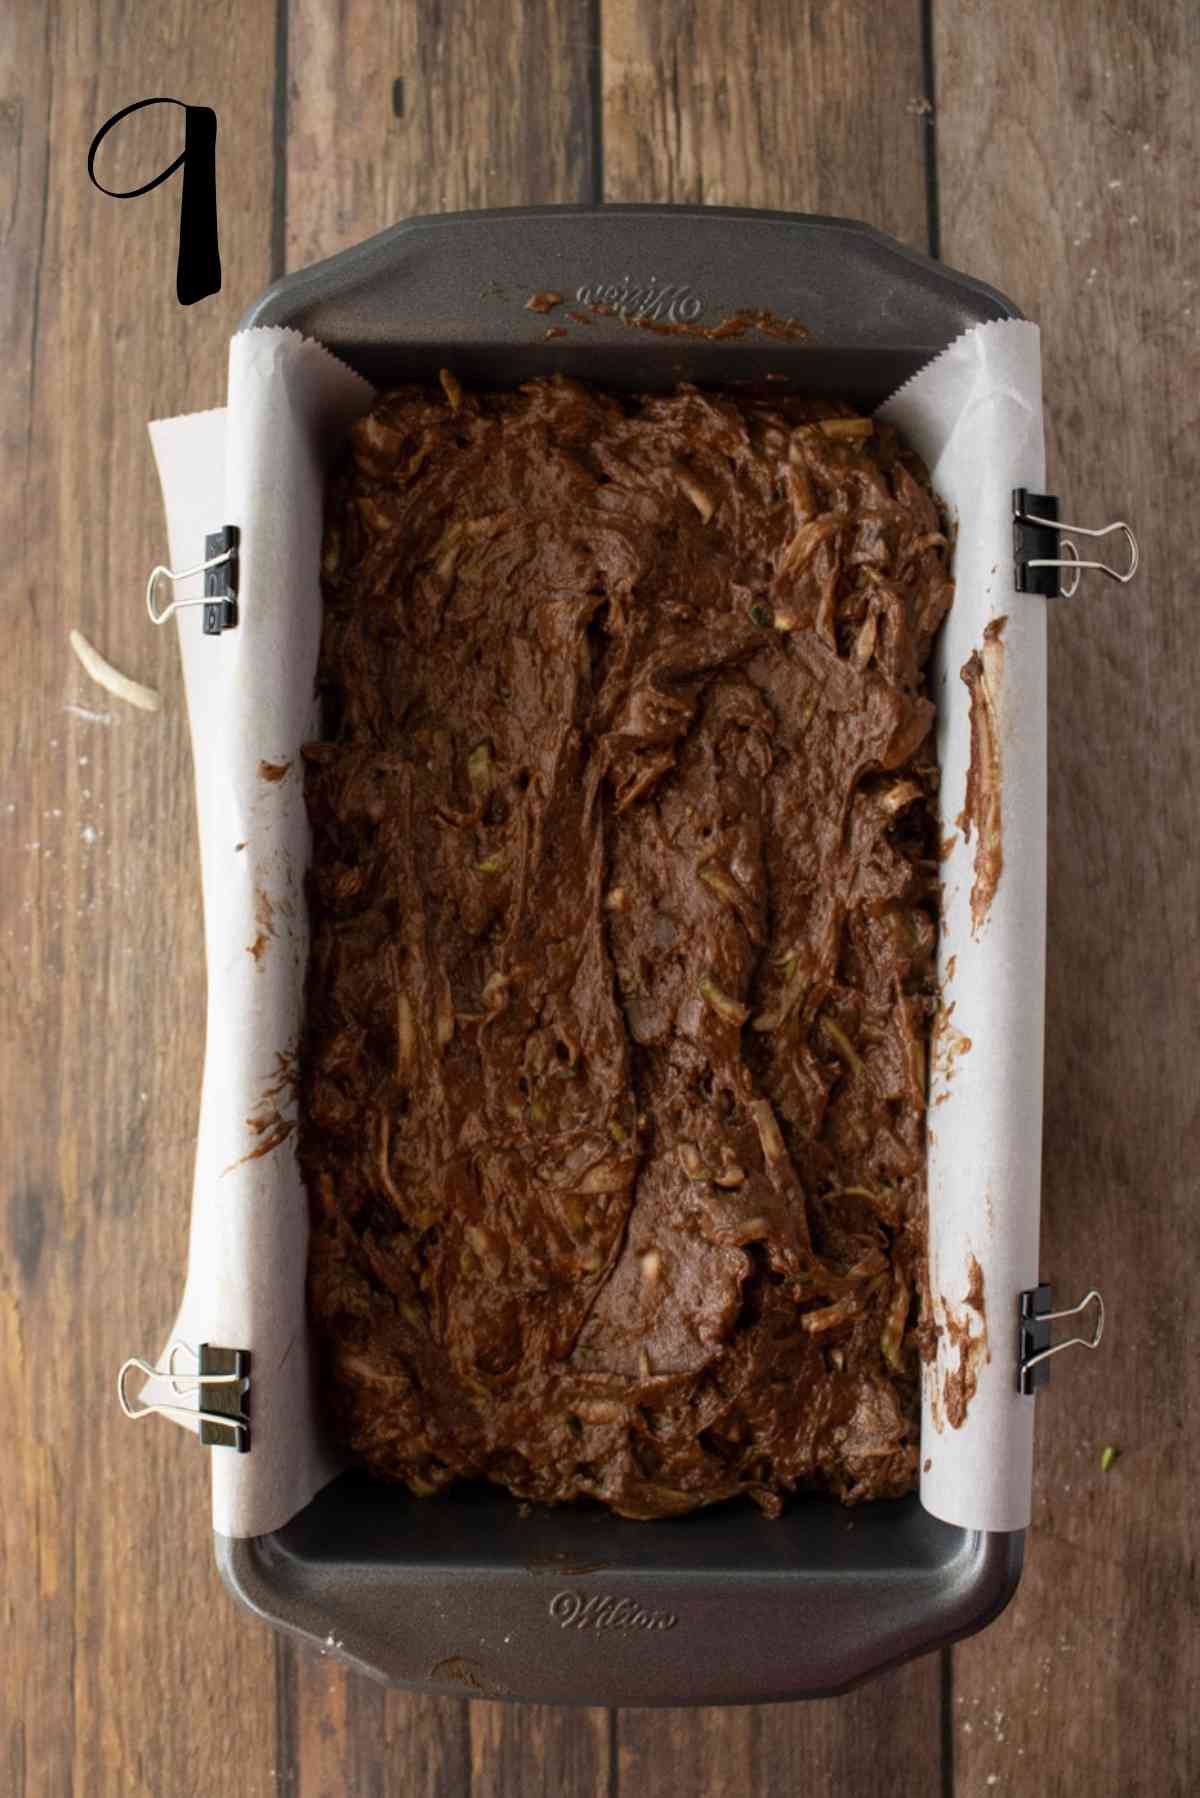 Spread the thick moist chocolate zucchini bread batter in the loaf pan.